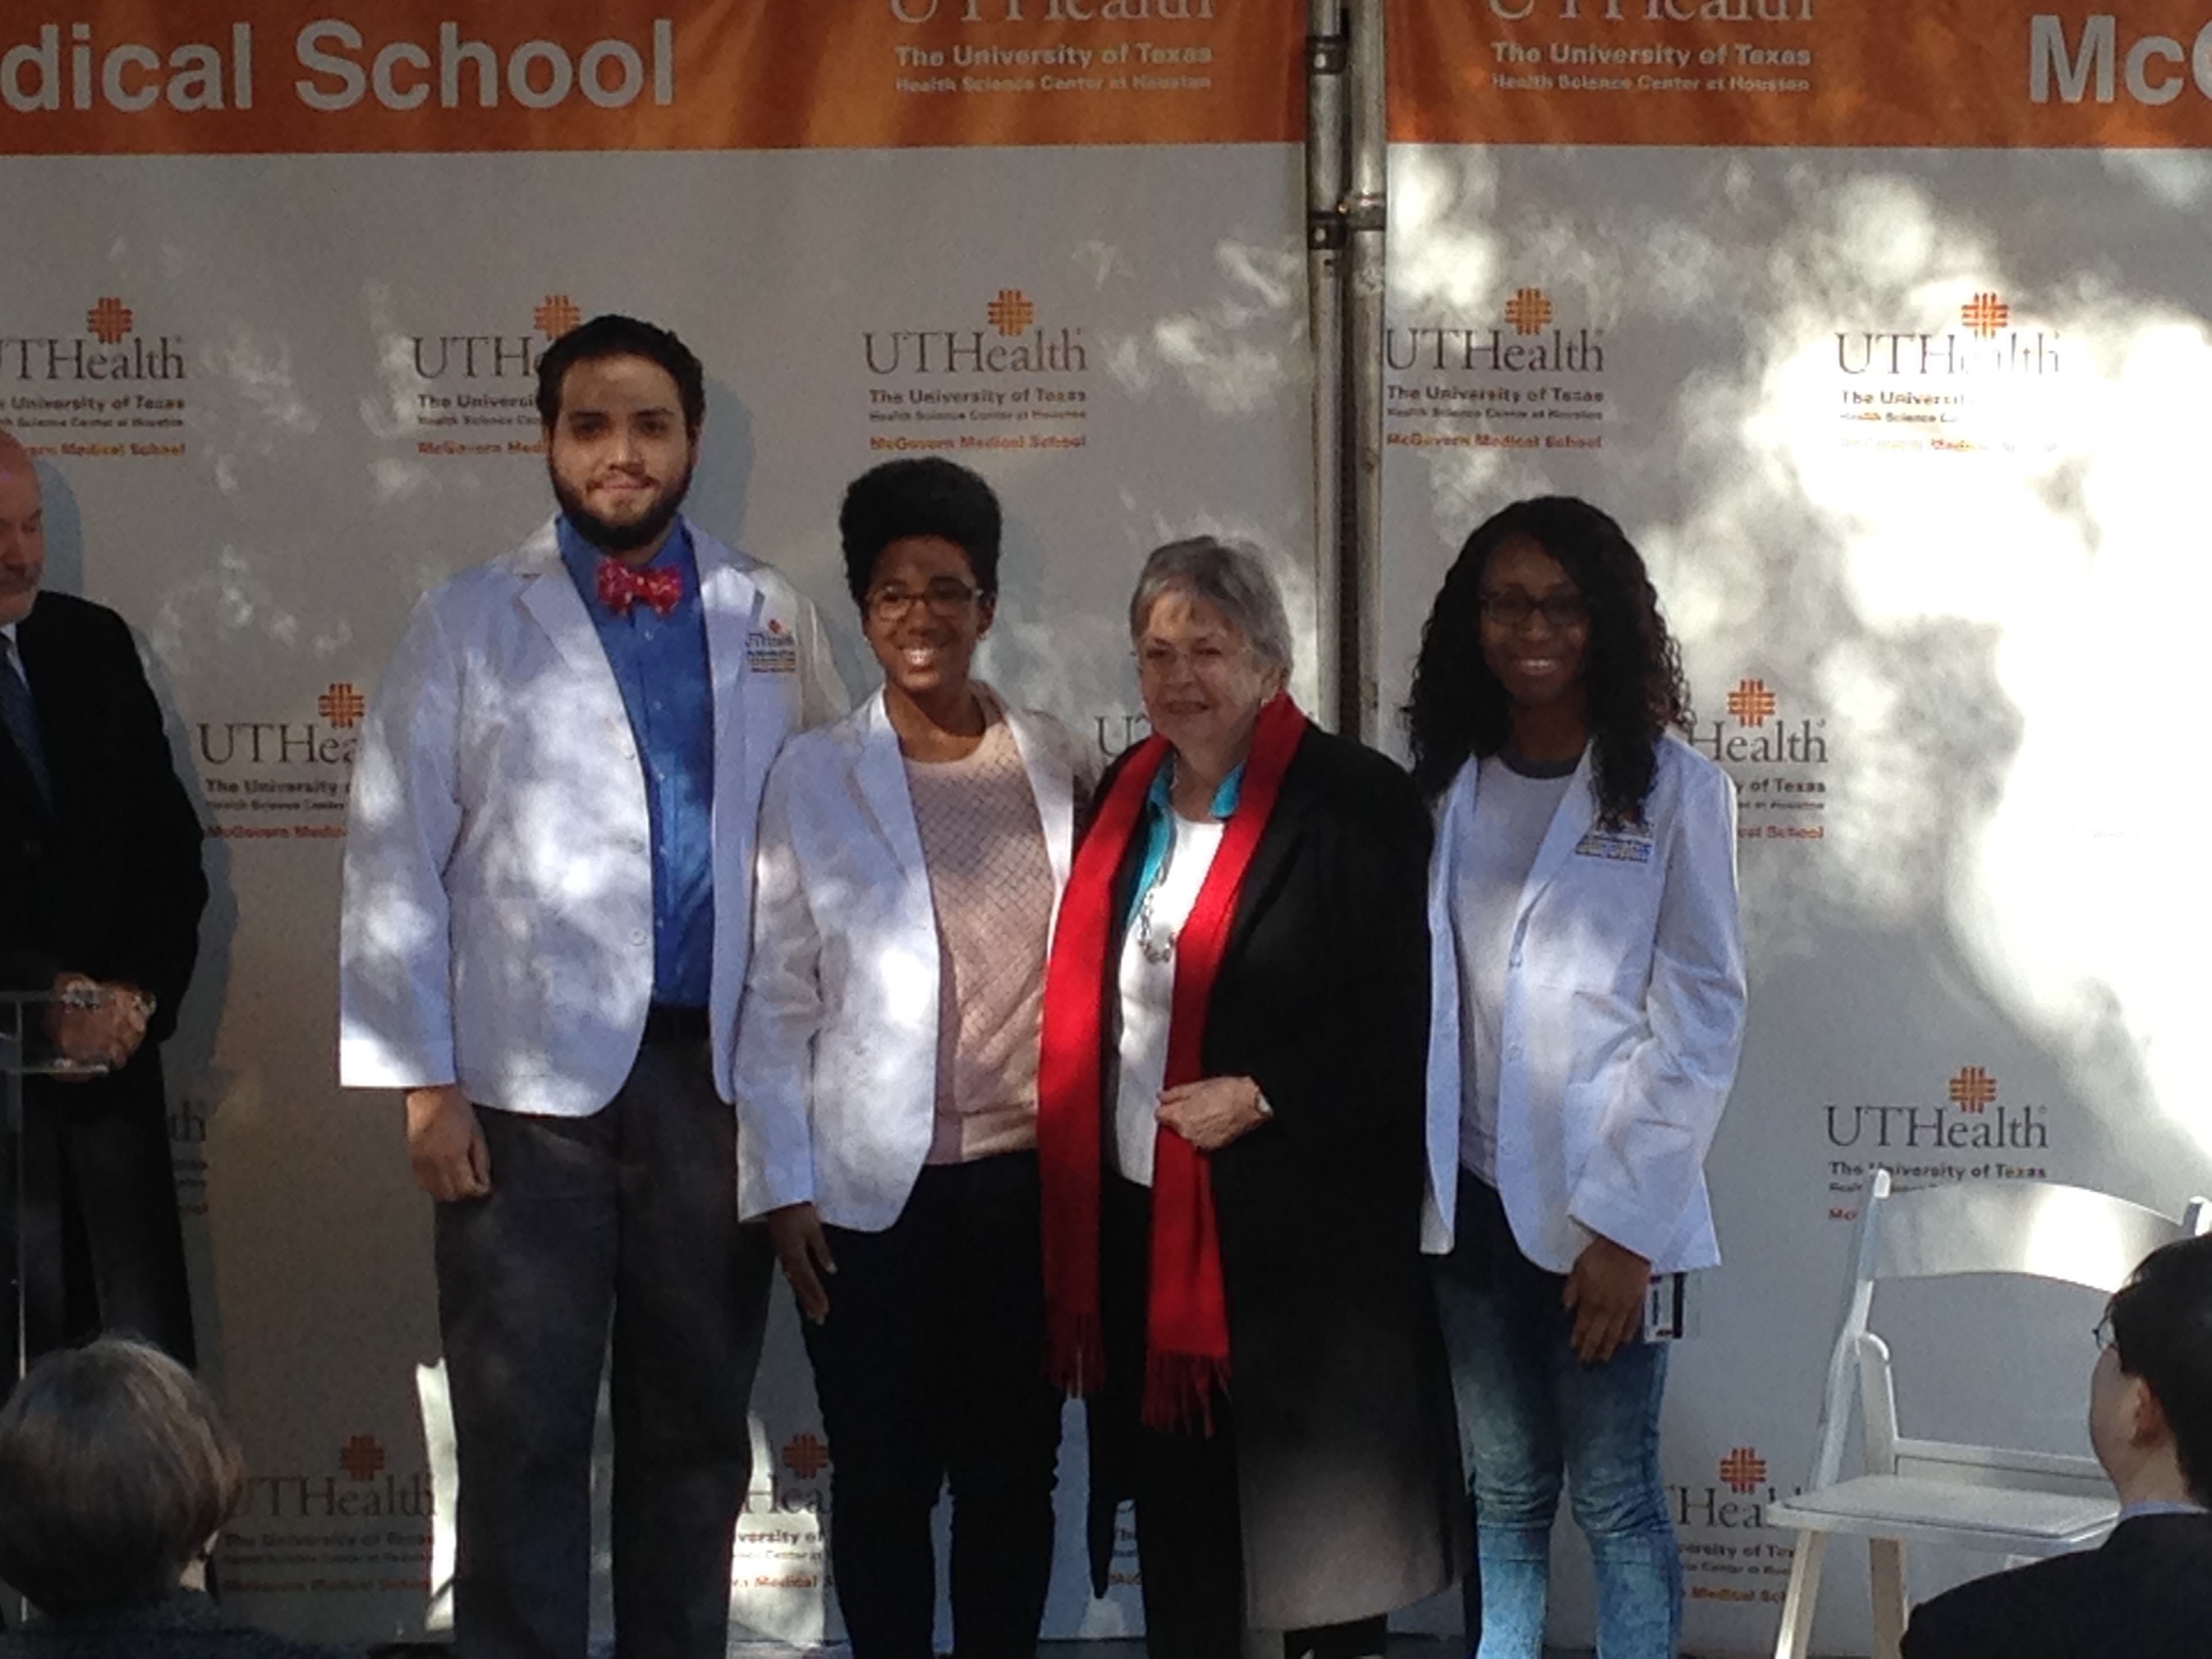 Kathrine G. McGovern, widow of Dr. John P. McGovern, poses with three students from the UT Health Science at Houston during the event where the donation was announced.